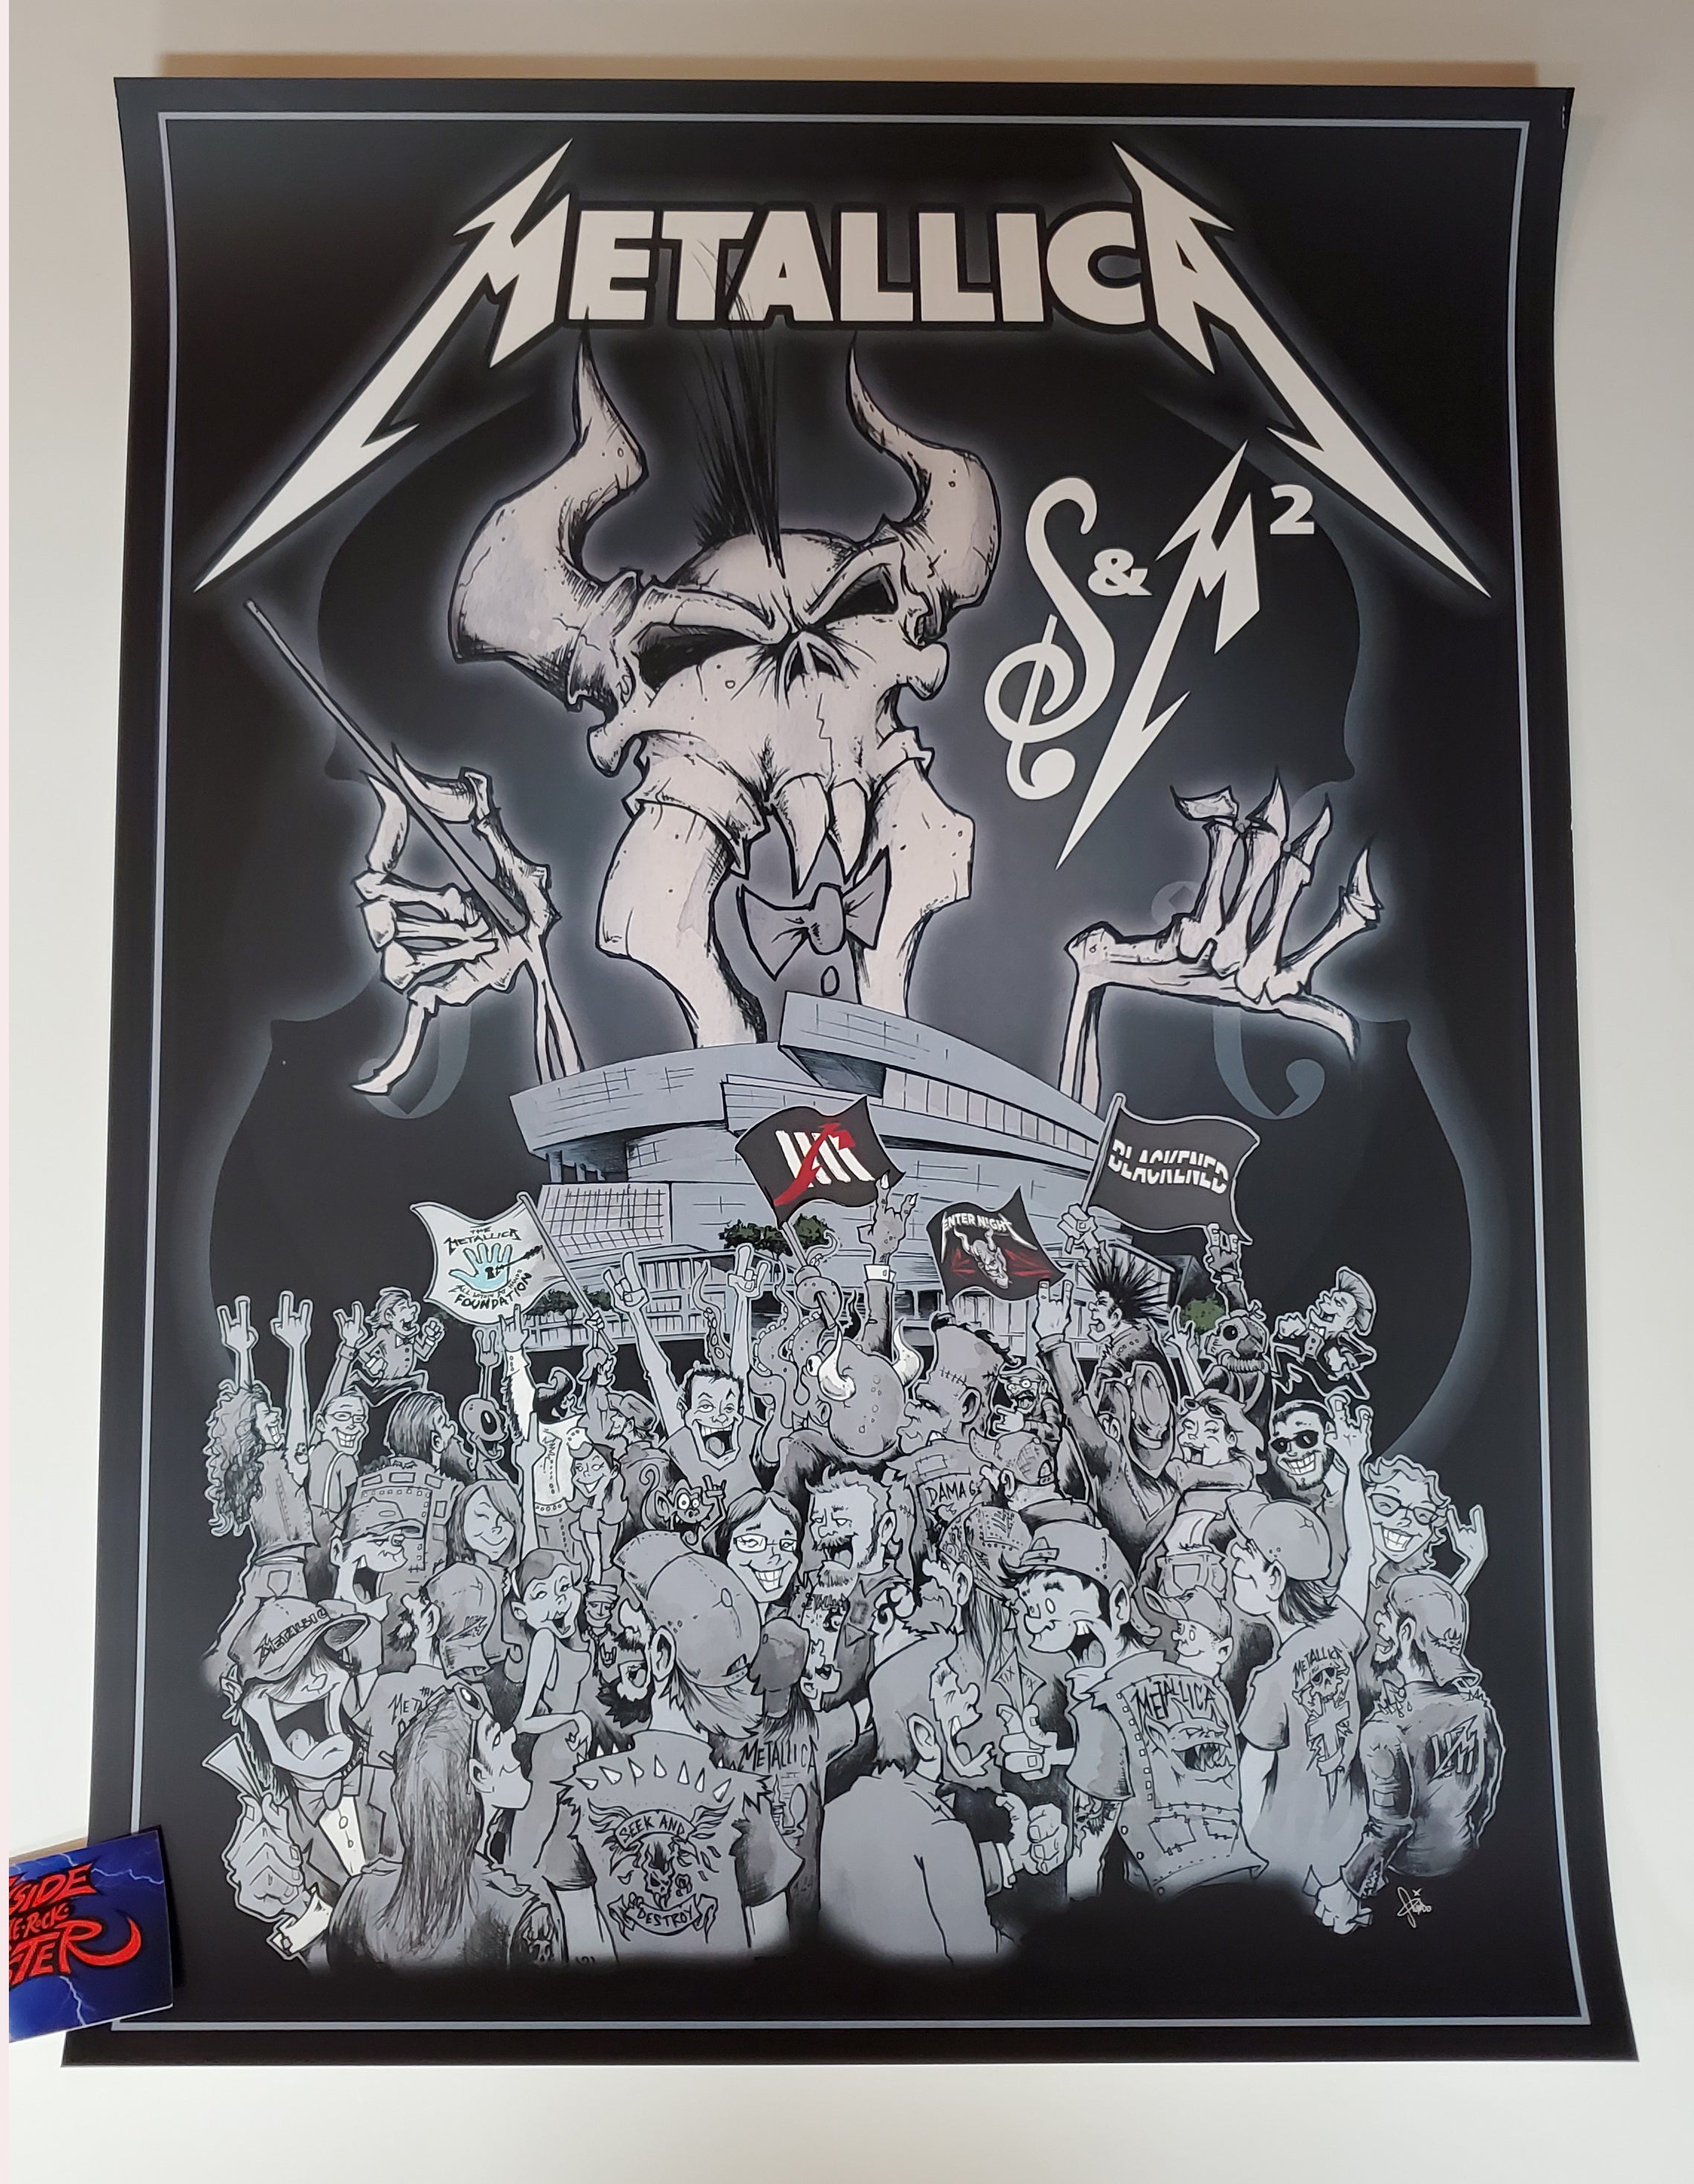 Tony Squindo Metallica S M San Francisco Crowd Arena Poster 19 Inside The Poster